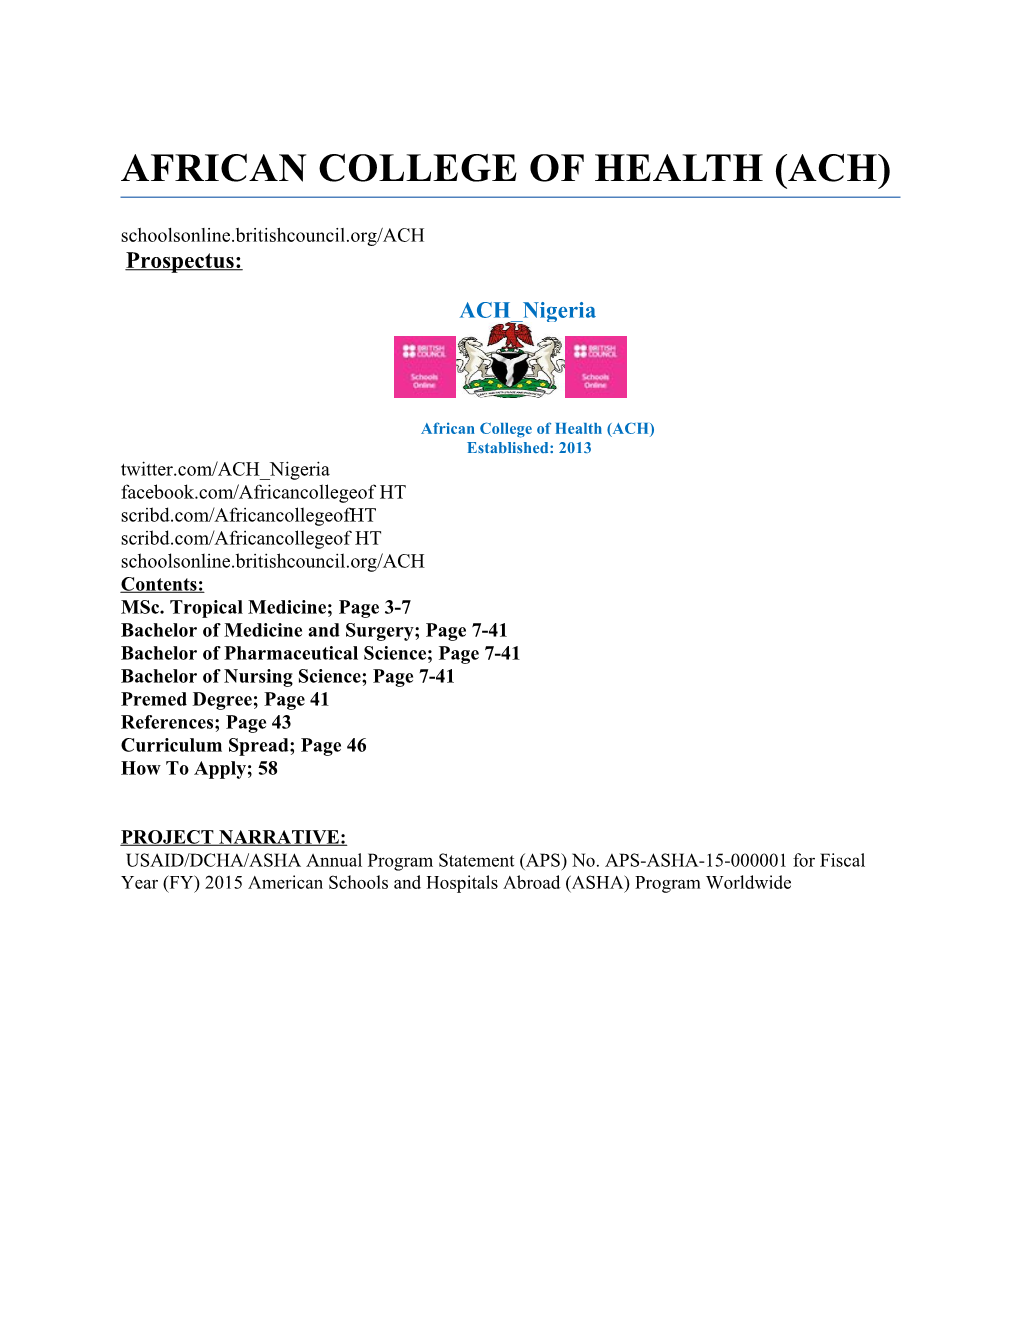 African College of Health (Ach)